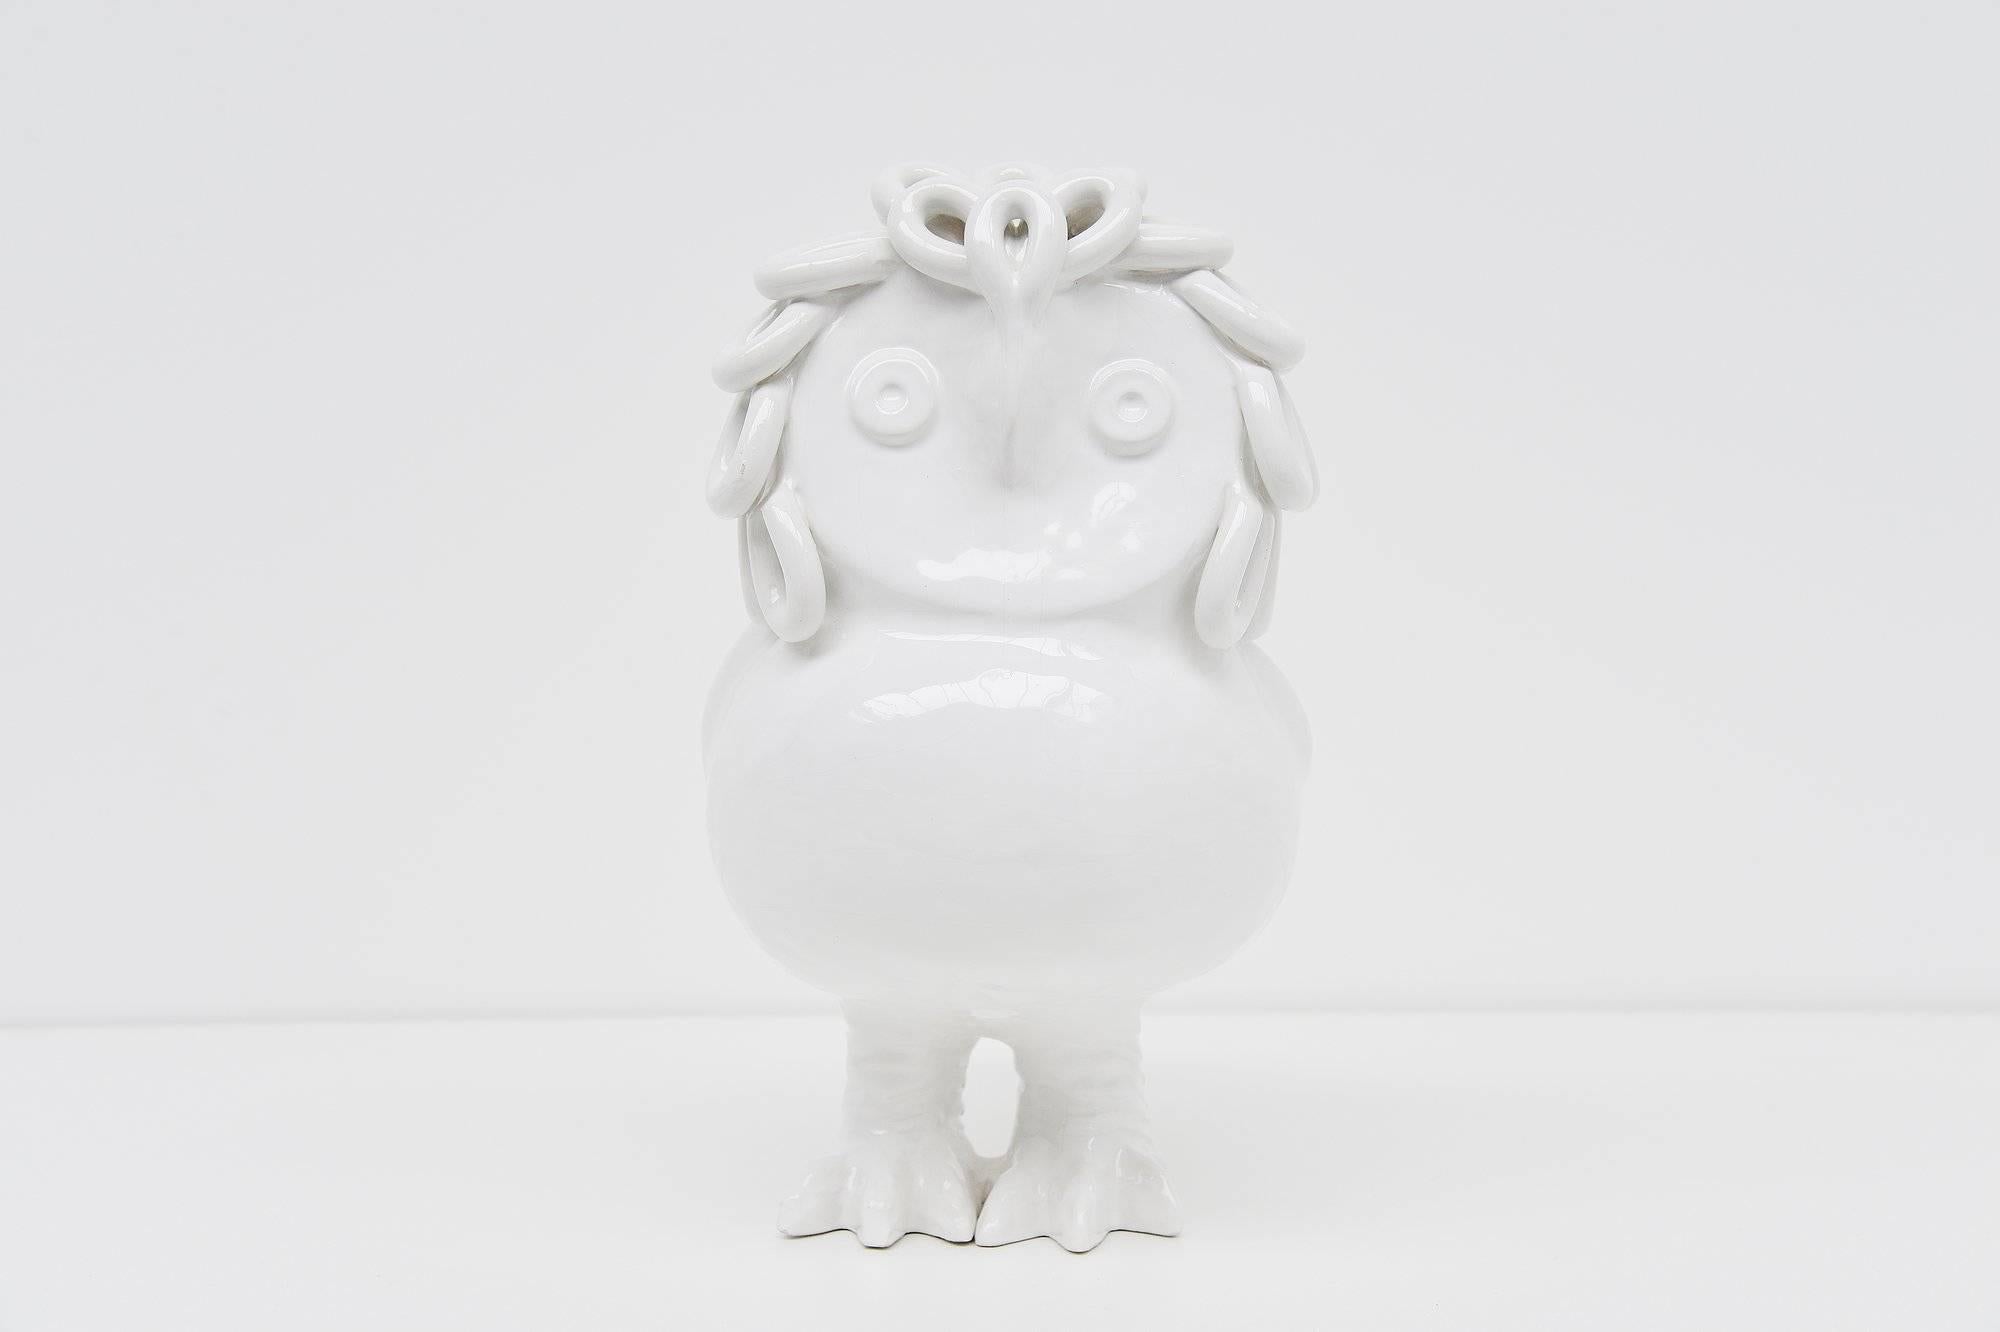 Very nice ceramic owl most probably made by Therese and Marie Henriette Bataille, France 1960. This white glazed ceramic owl was visibly inspired by the work of Pablo Picasso. Picasso was a source of inspiration to the work of these two sisters from